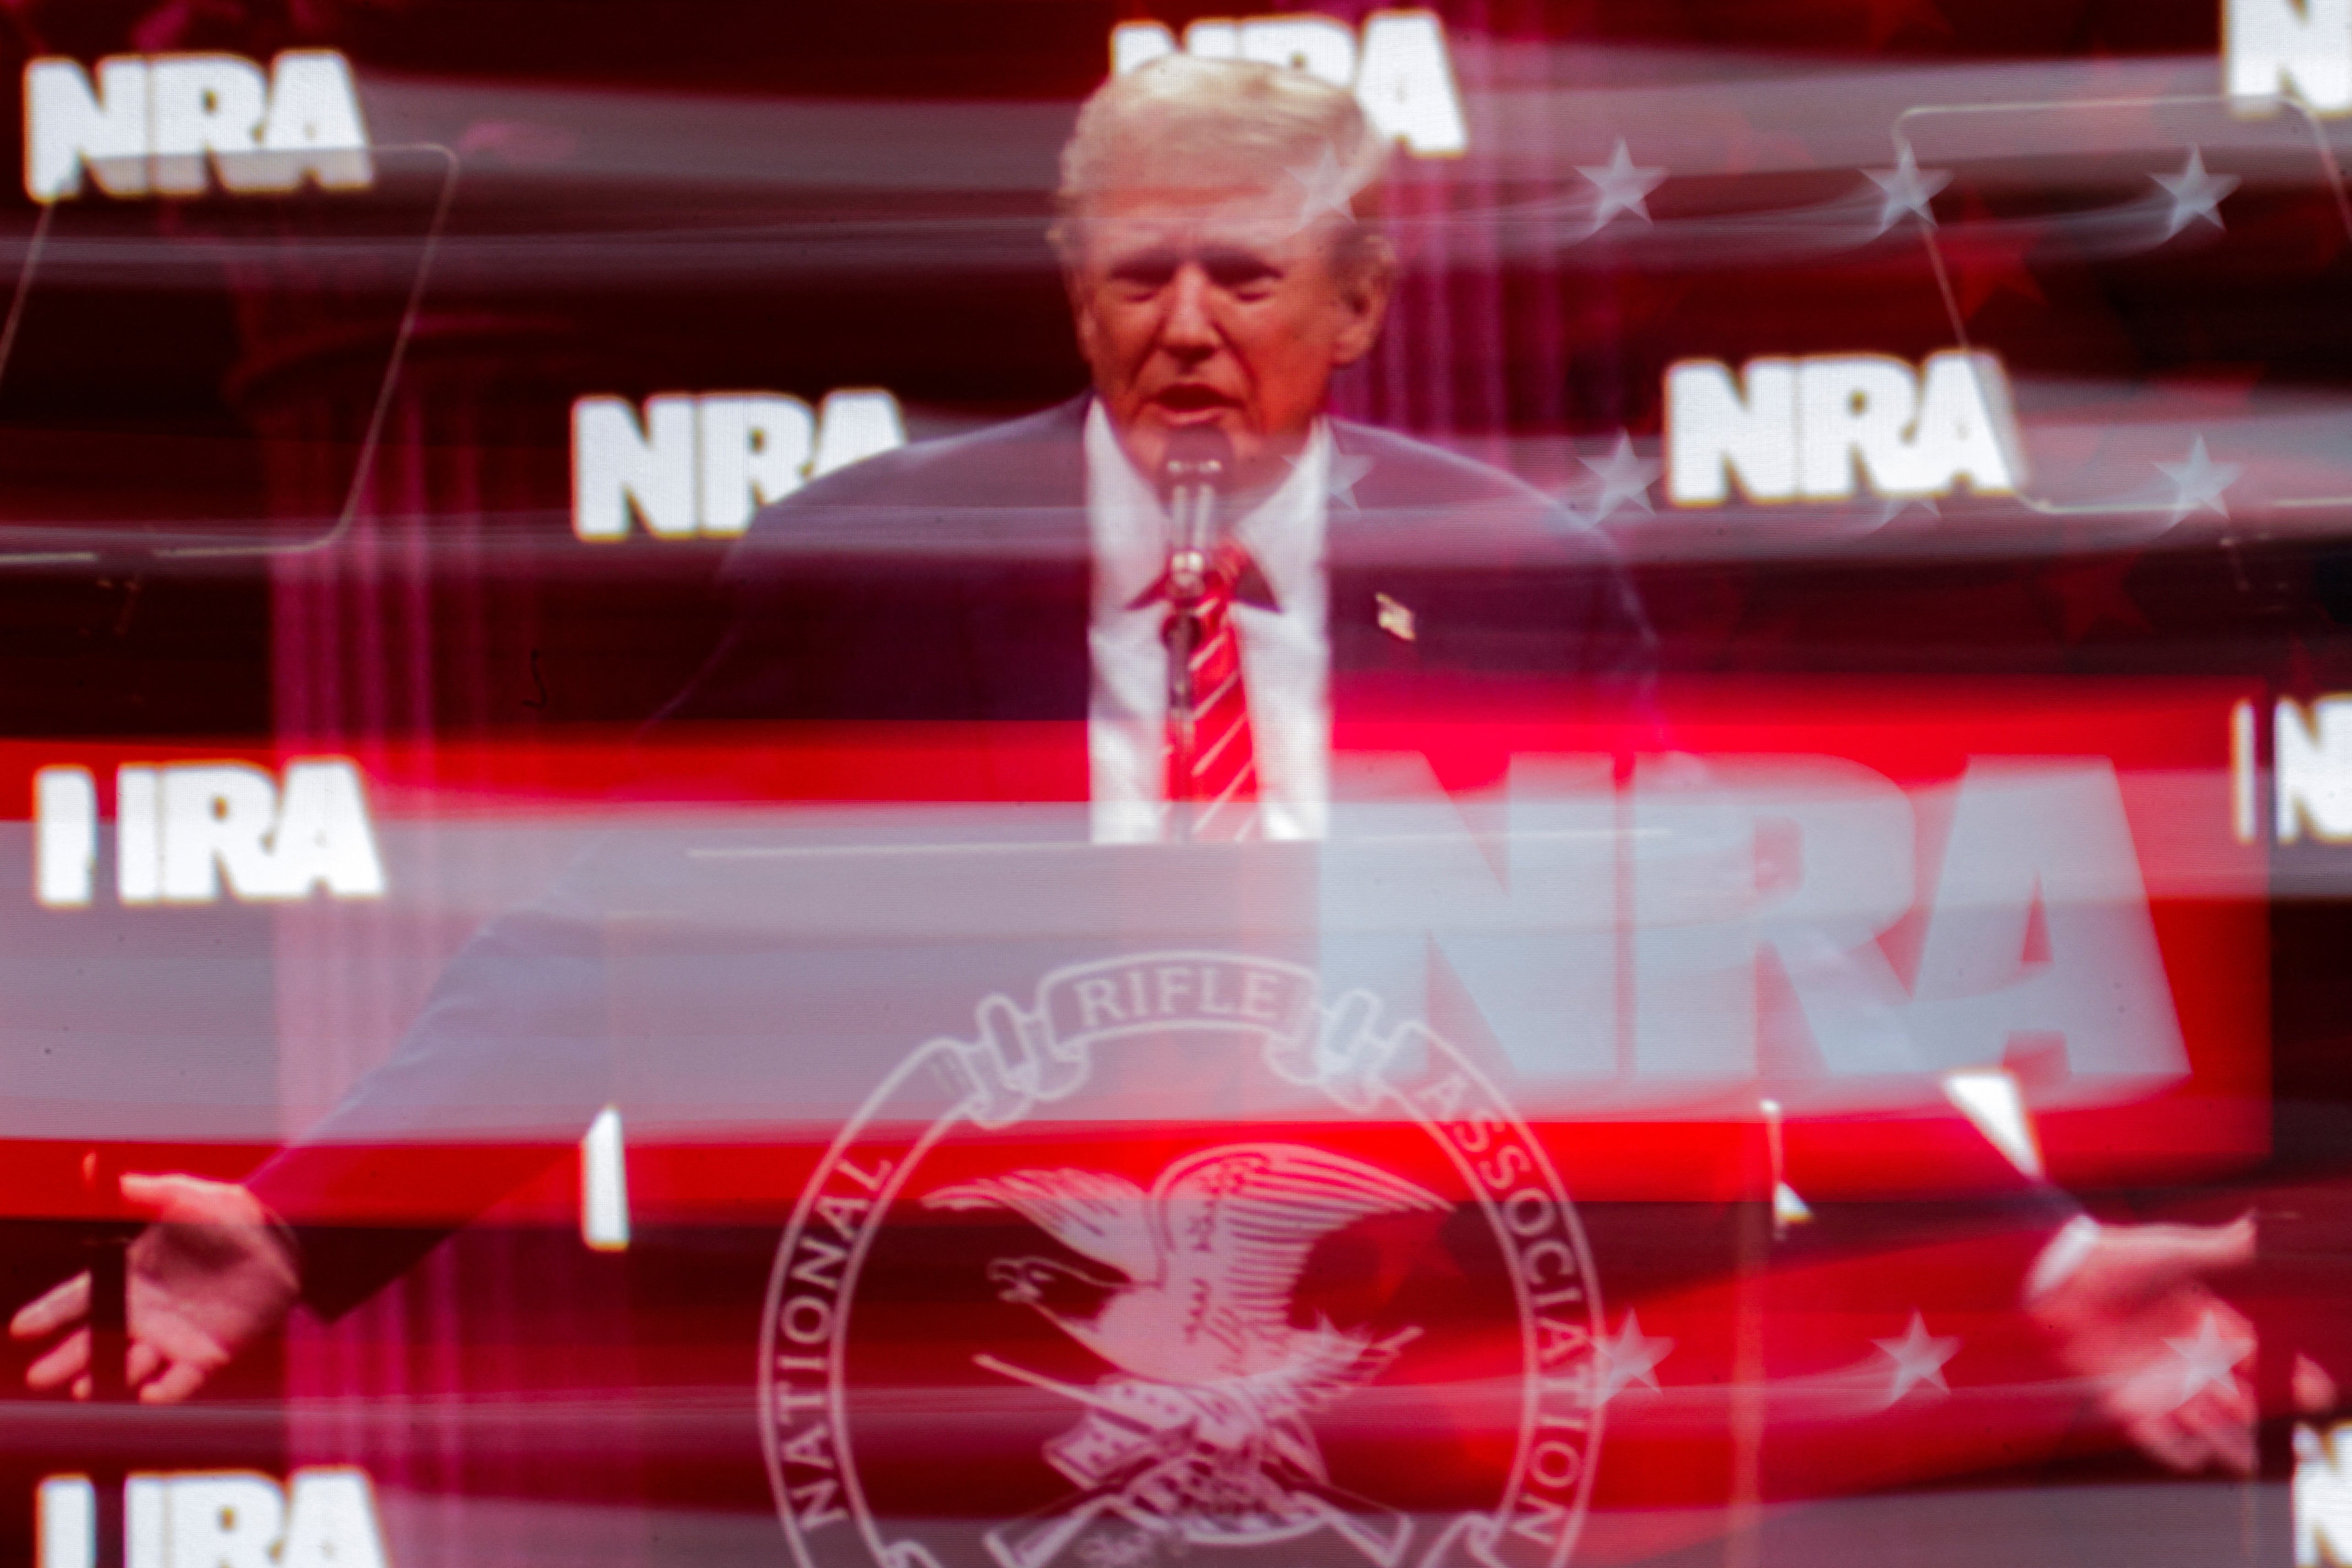 Donald Trump finally speaks at the NRA convention after showing up hours late